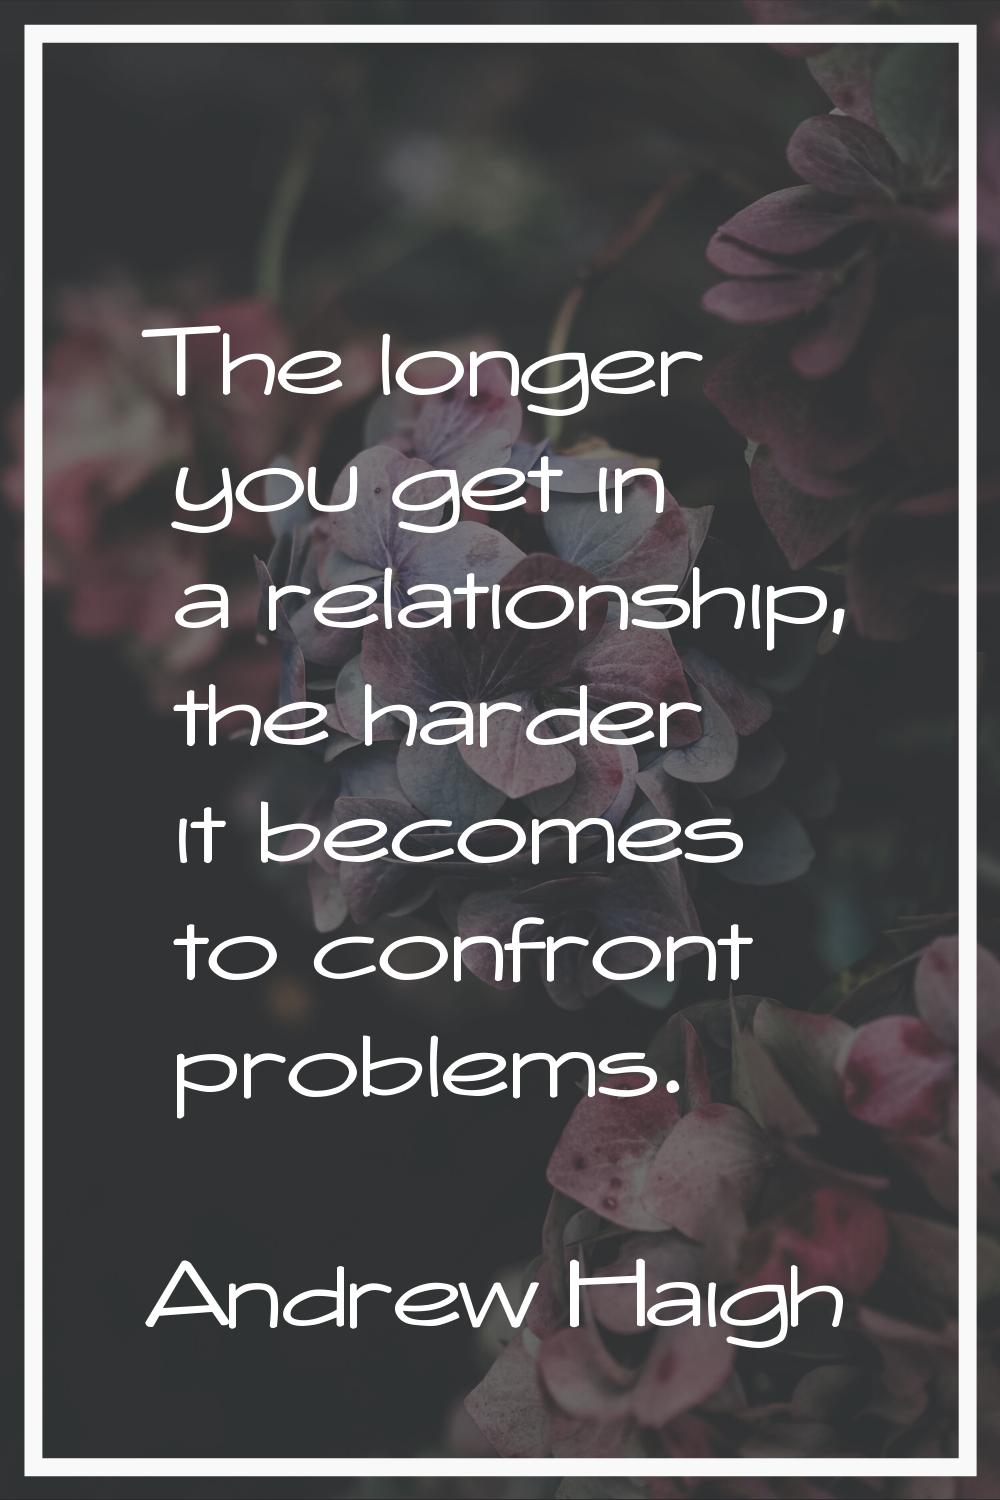 The longer you get in a relationship, the harder it becomes to confront problems.